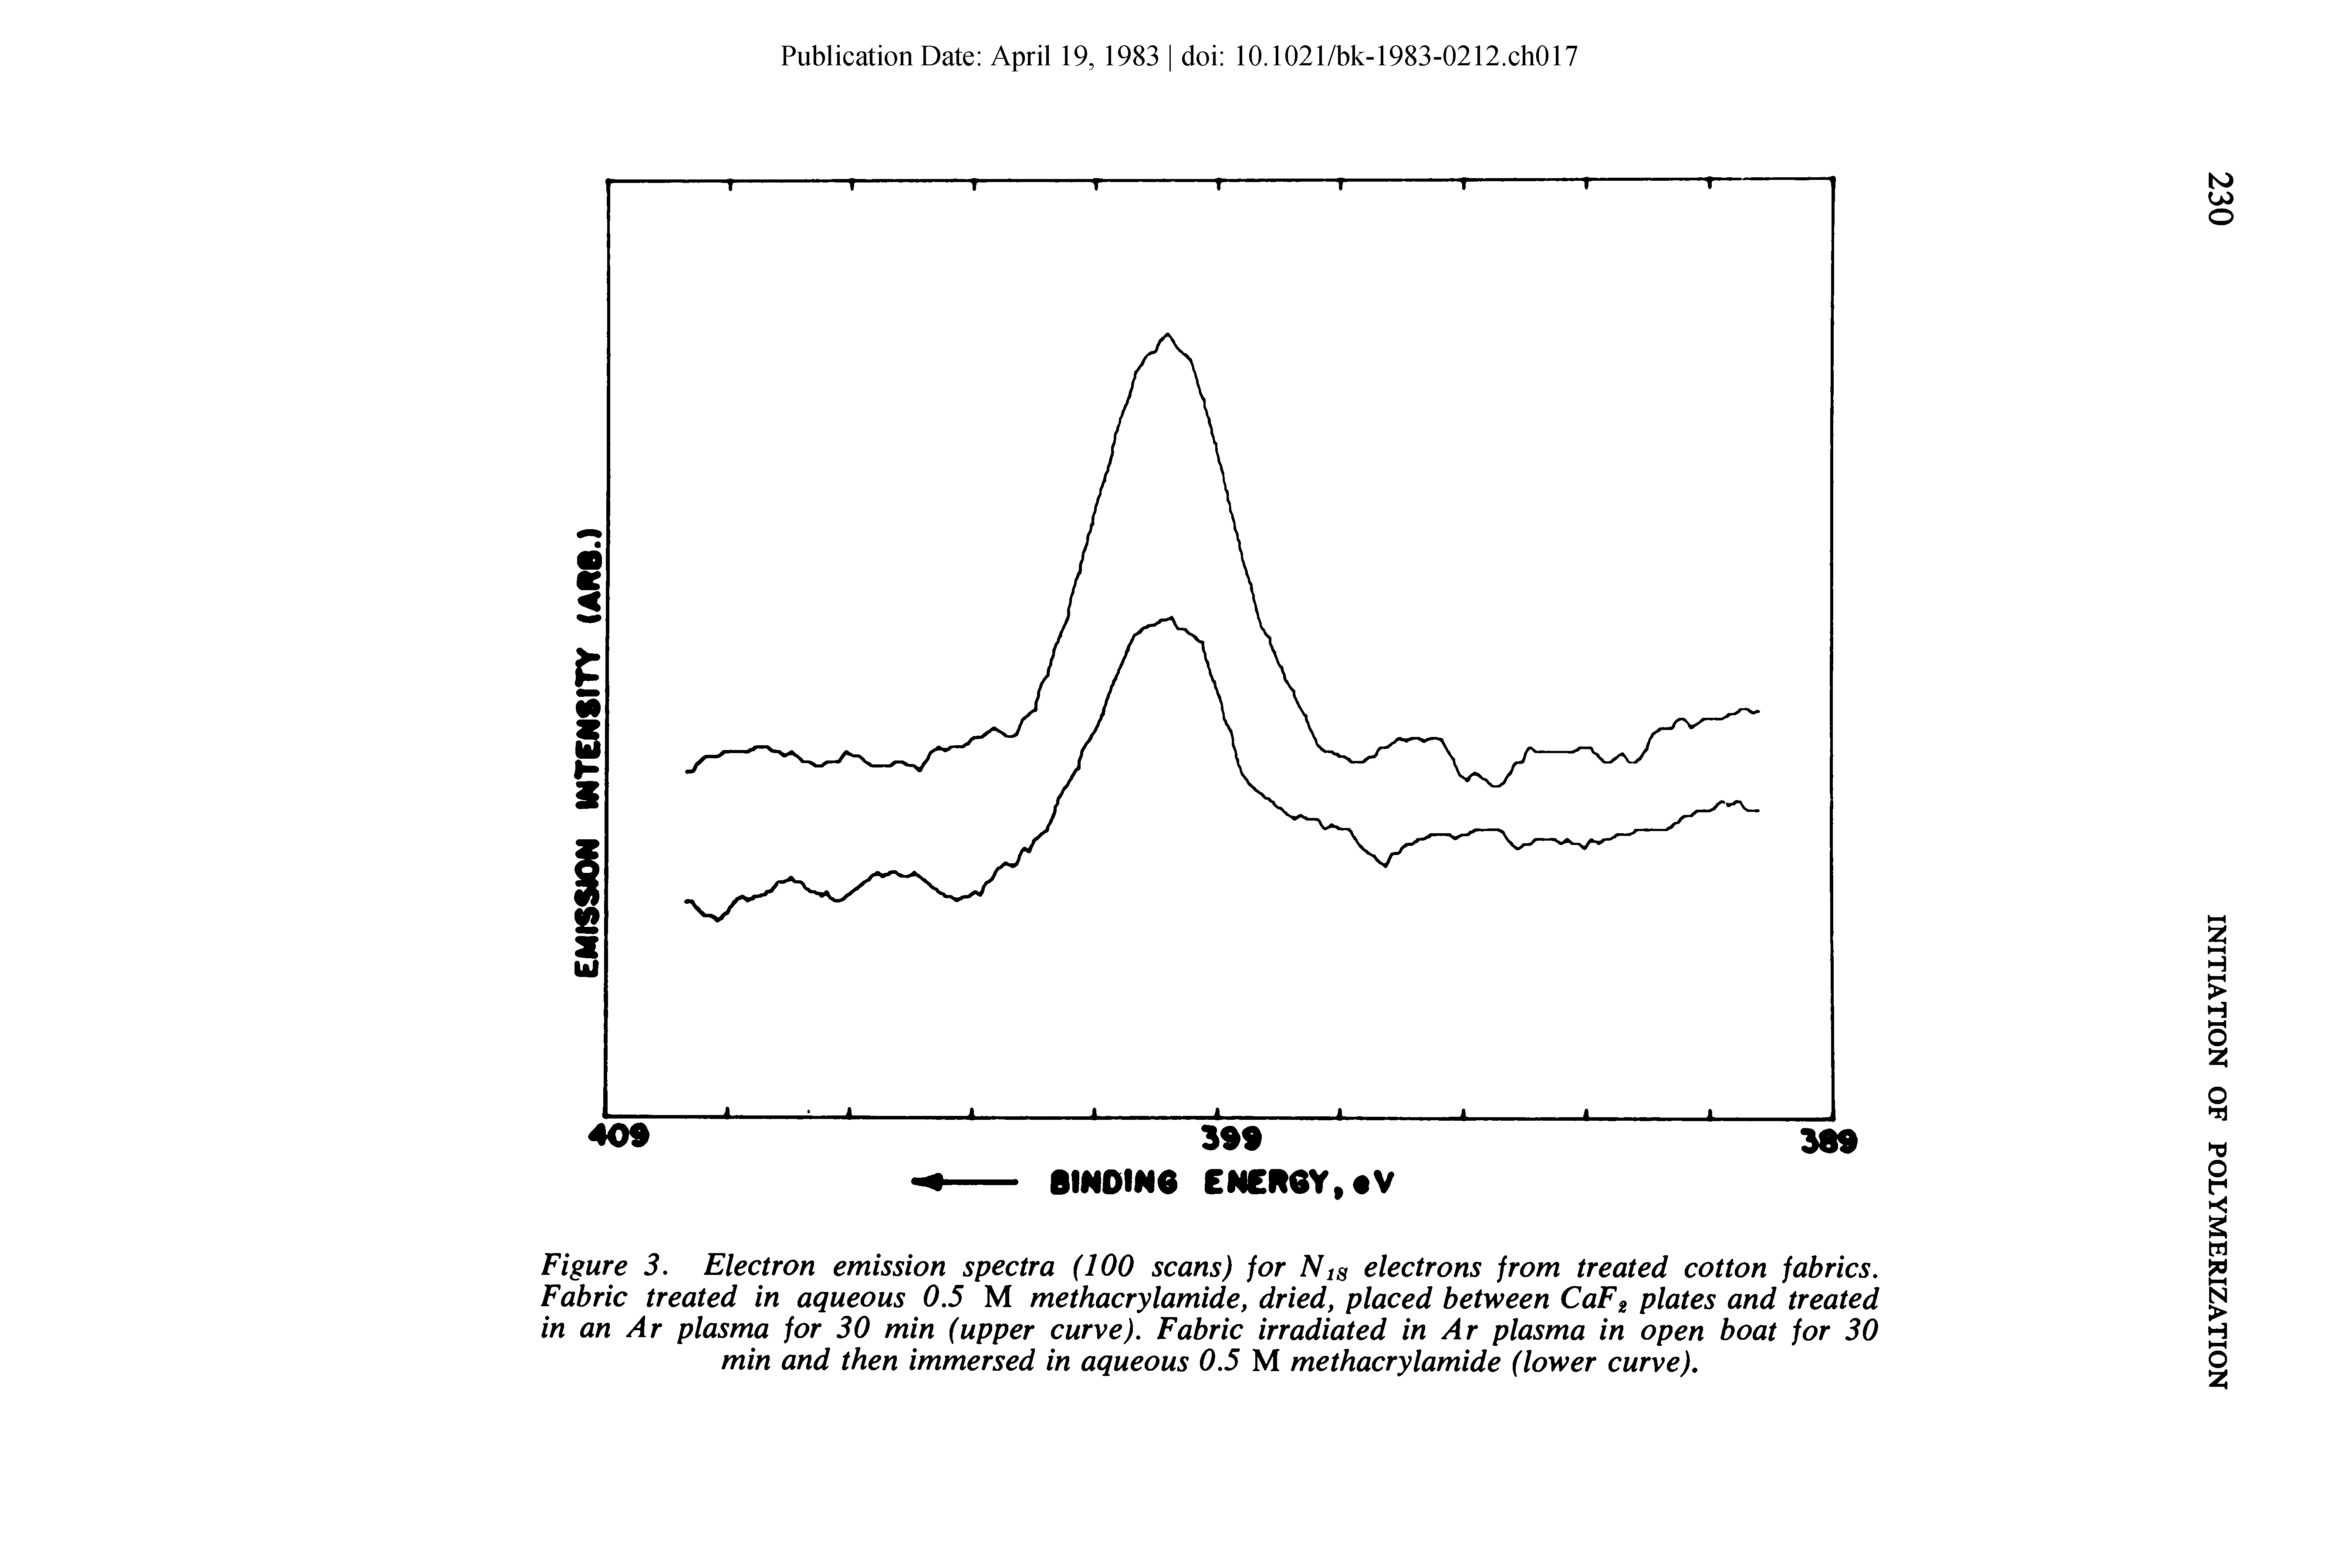 Figure 3. Electron emission spectra (100 scans) for Nis electrons from treated cotton fabrics. Fabric treated in aqueous 0.5 M methacrylamide, dried, placed between CaFz plates and treated in an Ar plasma for 30 min (upper curve). Fabric irradiated in Ar plasma in open boat for 30 min and then immersed in aqueous 0.5 M methacrylamide (lower curve).